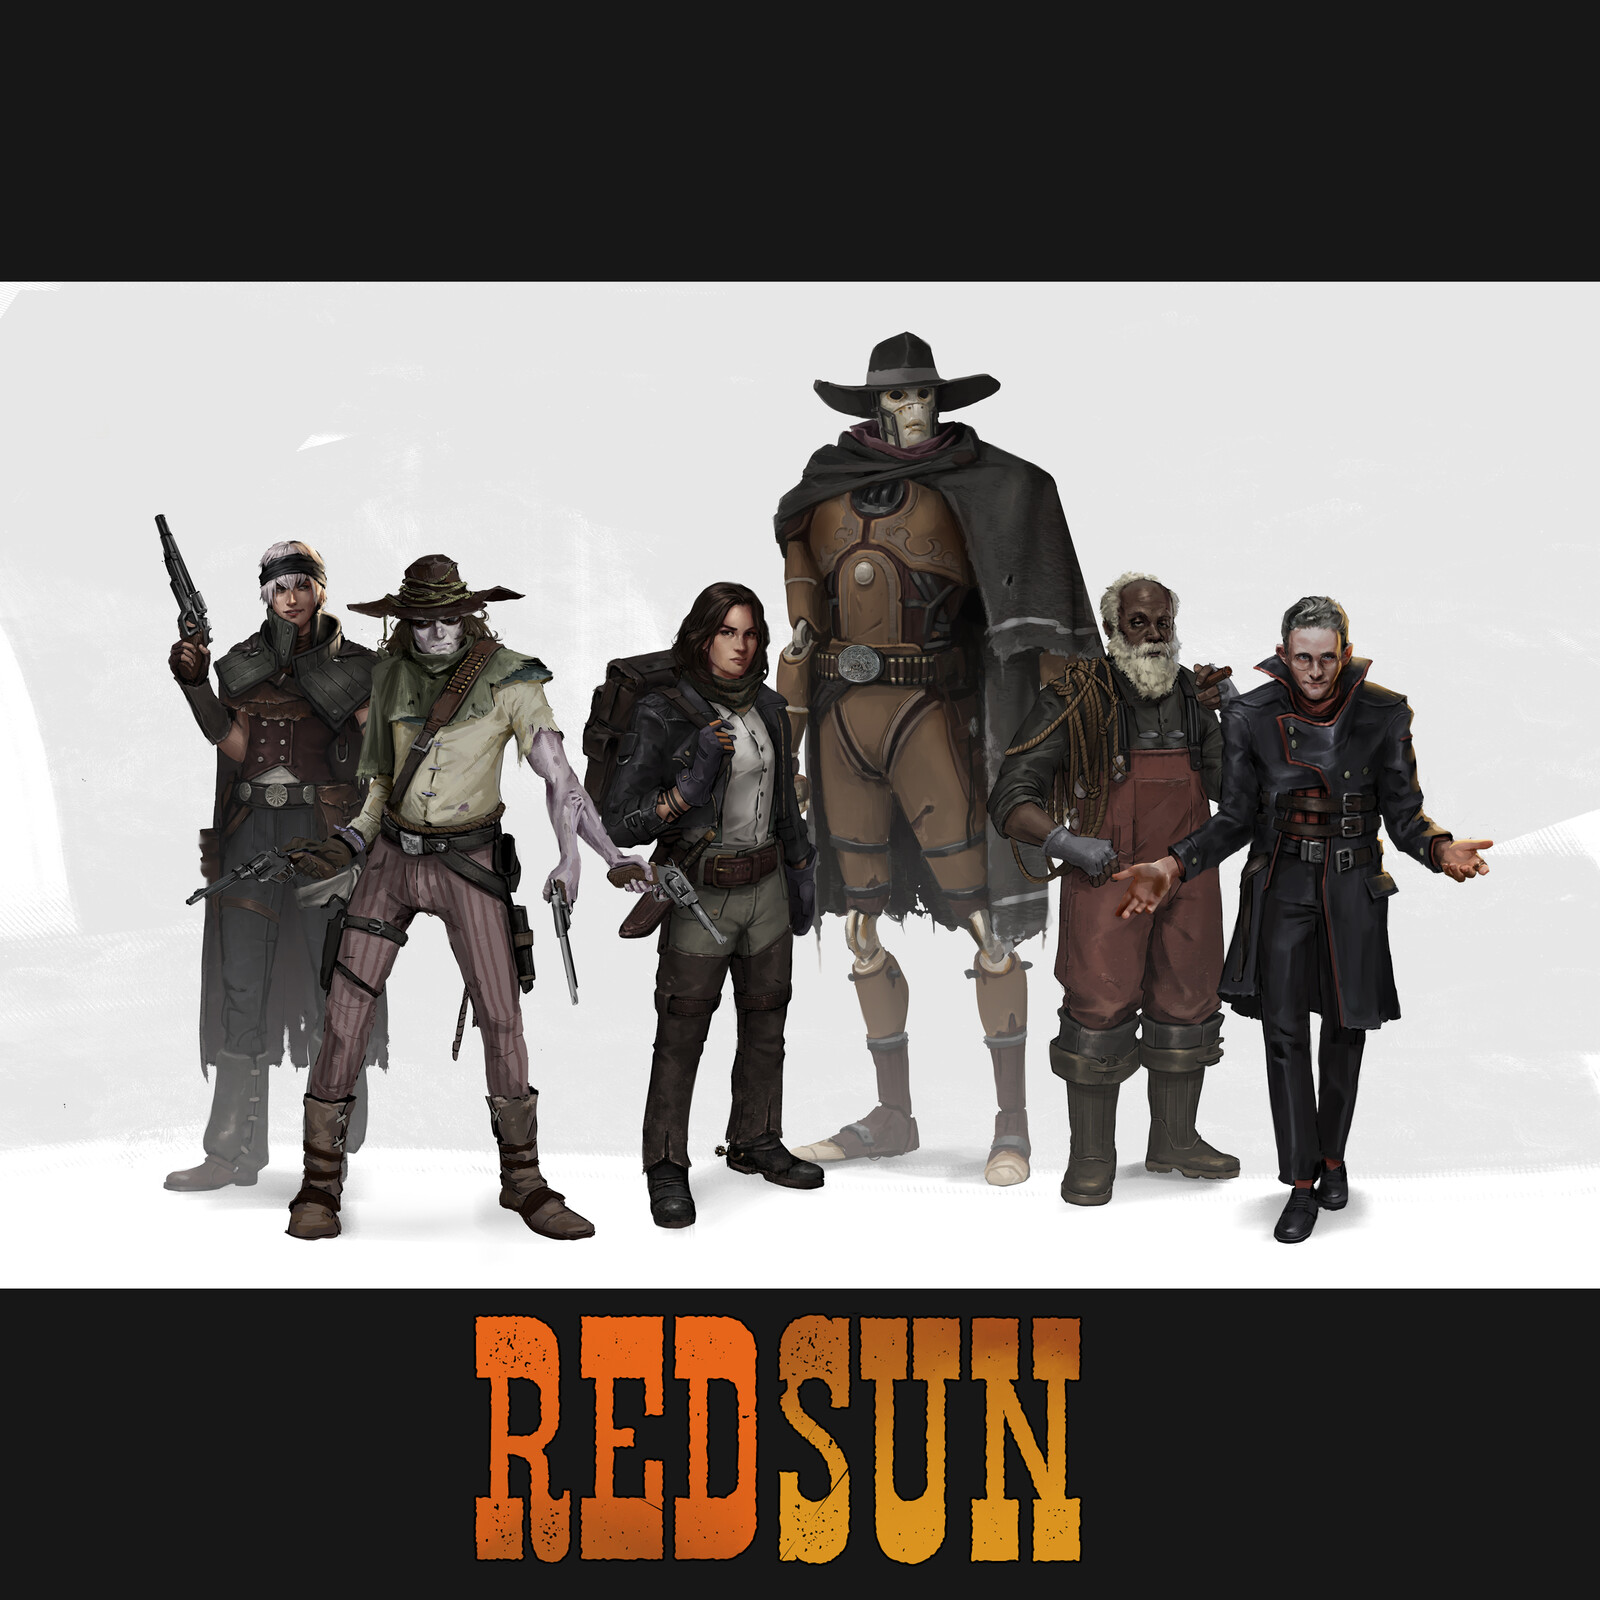 Red Sun characters